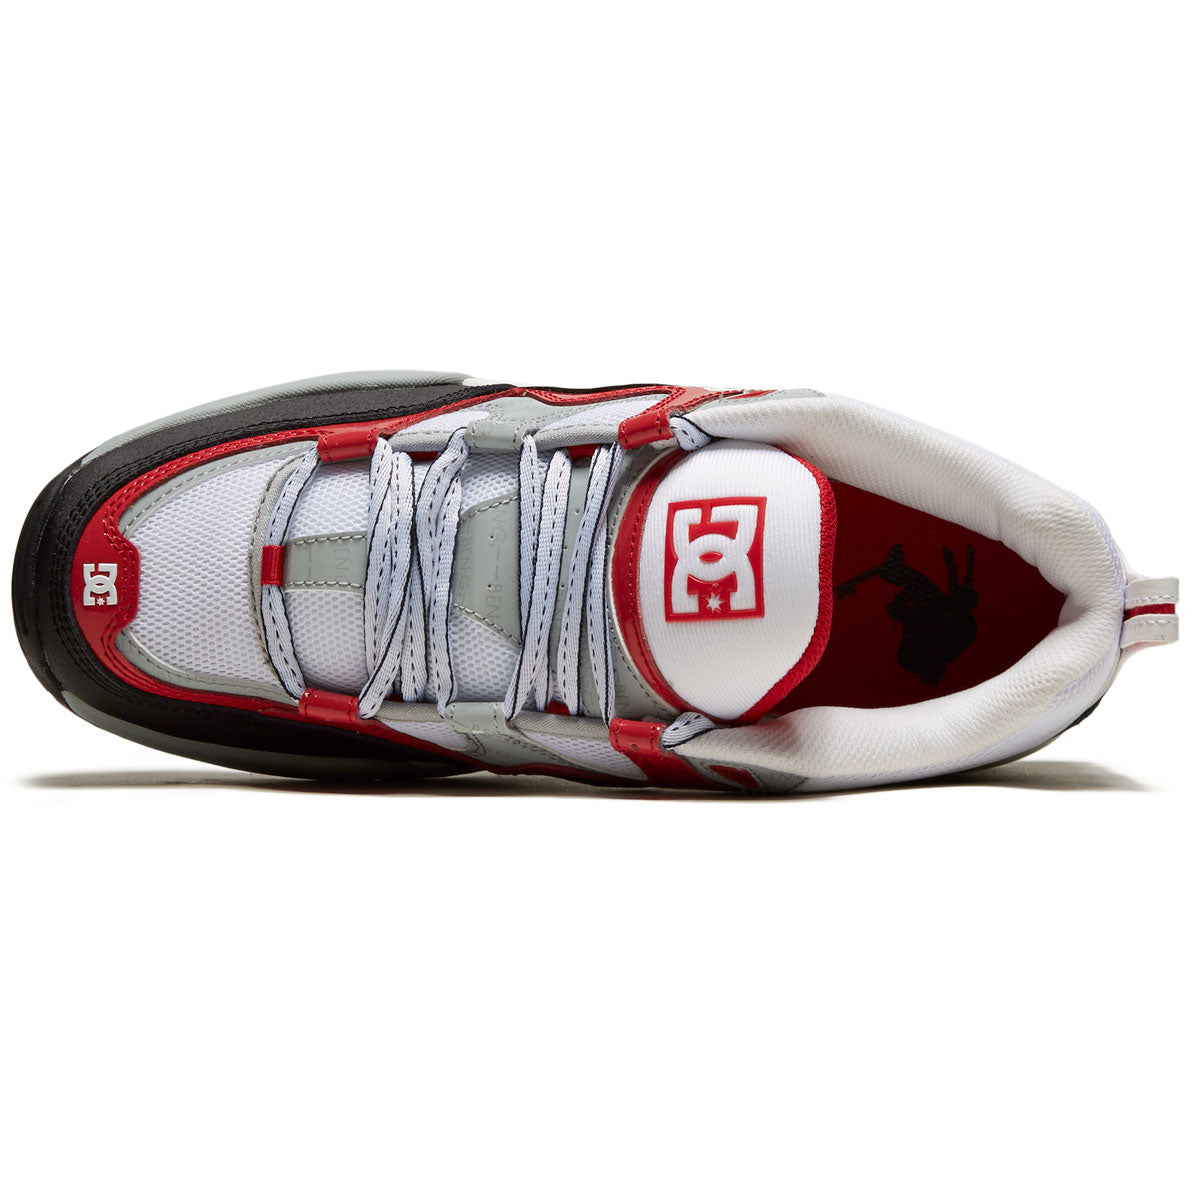 DC x Ben G Truth Shoes - Black/White/Red image 3